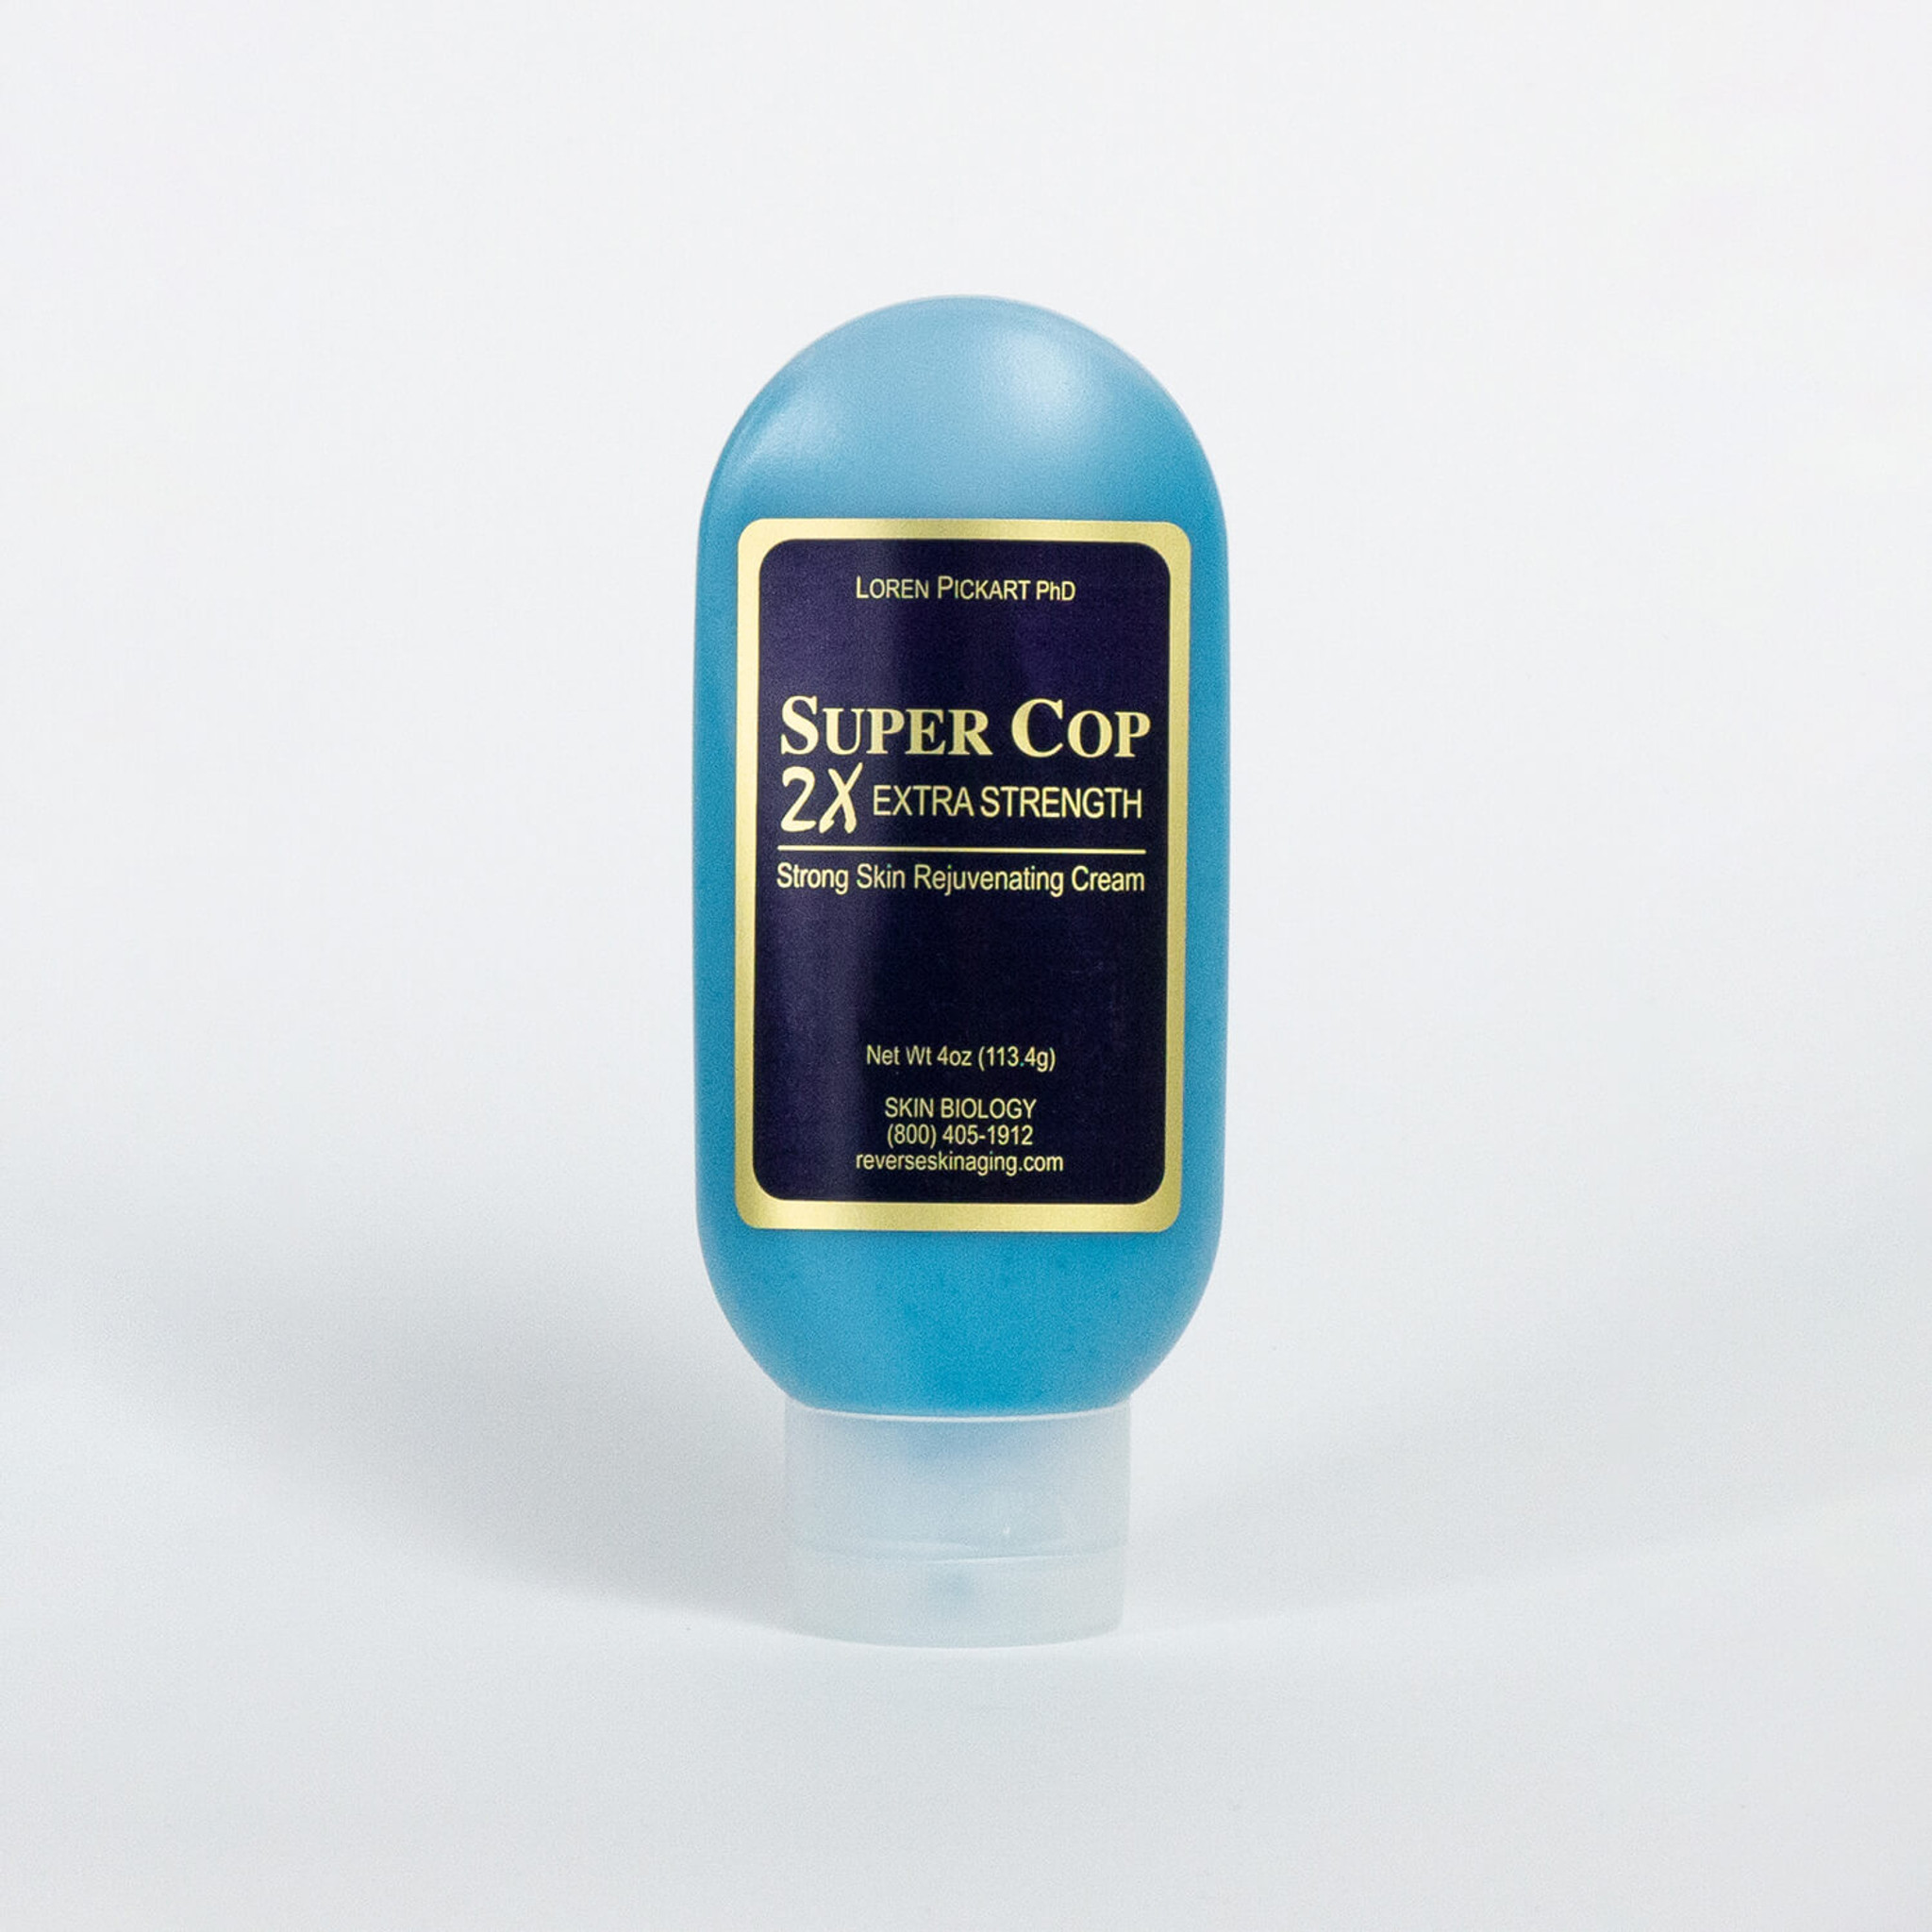 Strongest Copper Peptide - Super Cop 2X to Fade Blemishes, Sun